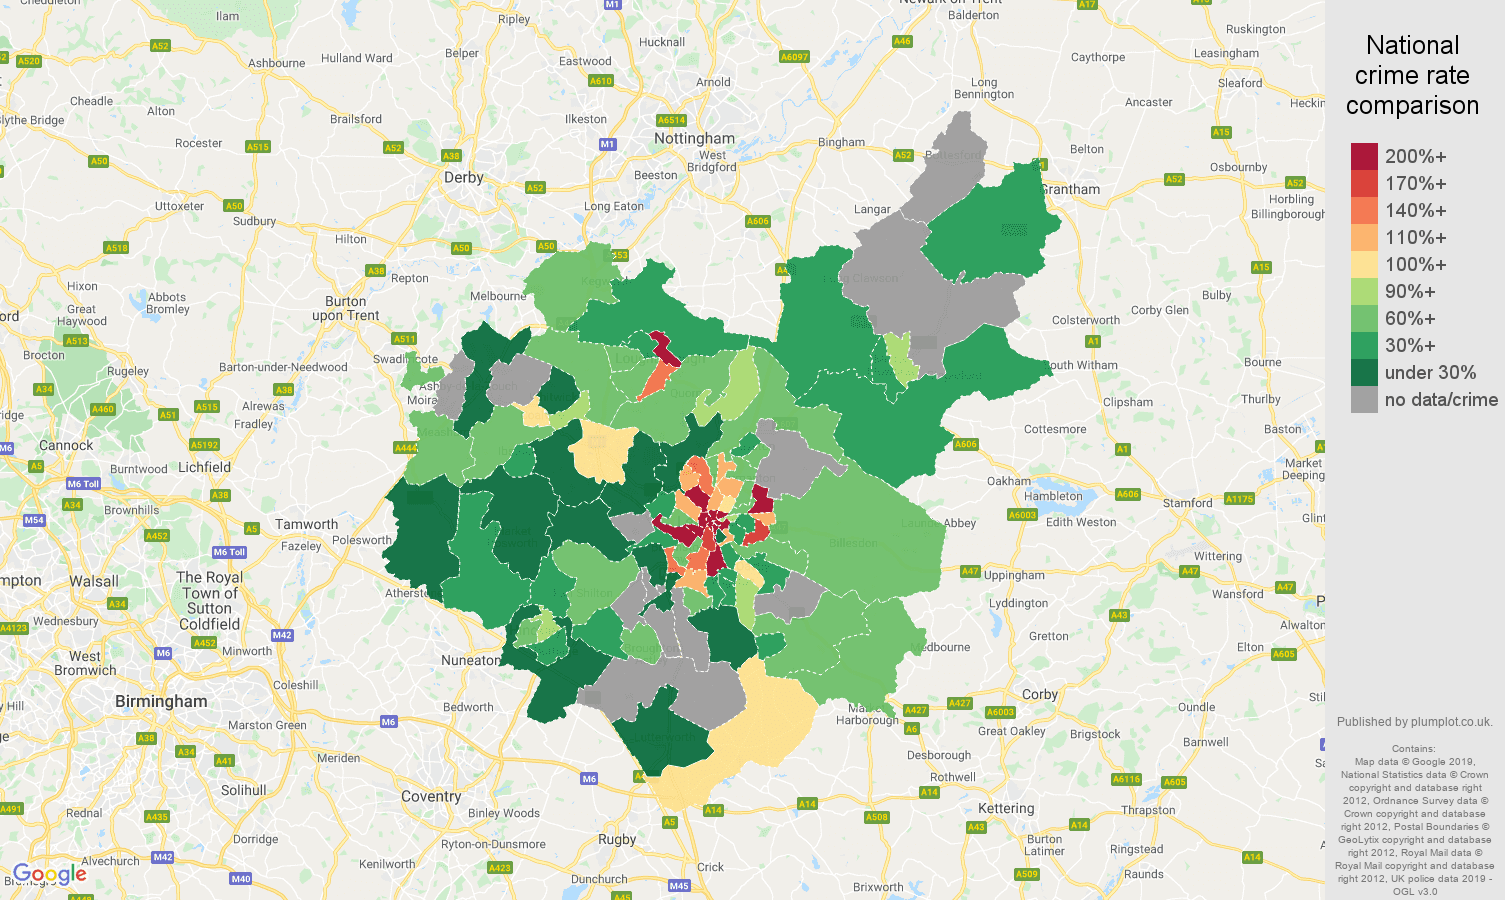 Leicestershire possession of weapons crime rate comparison map